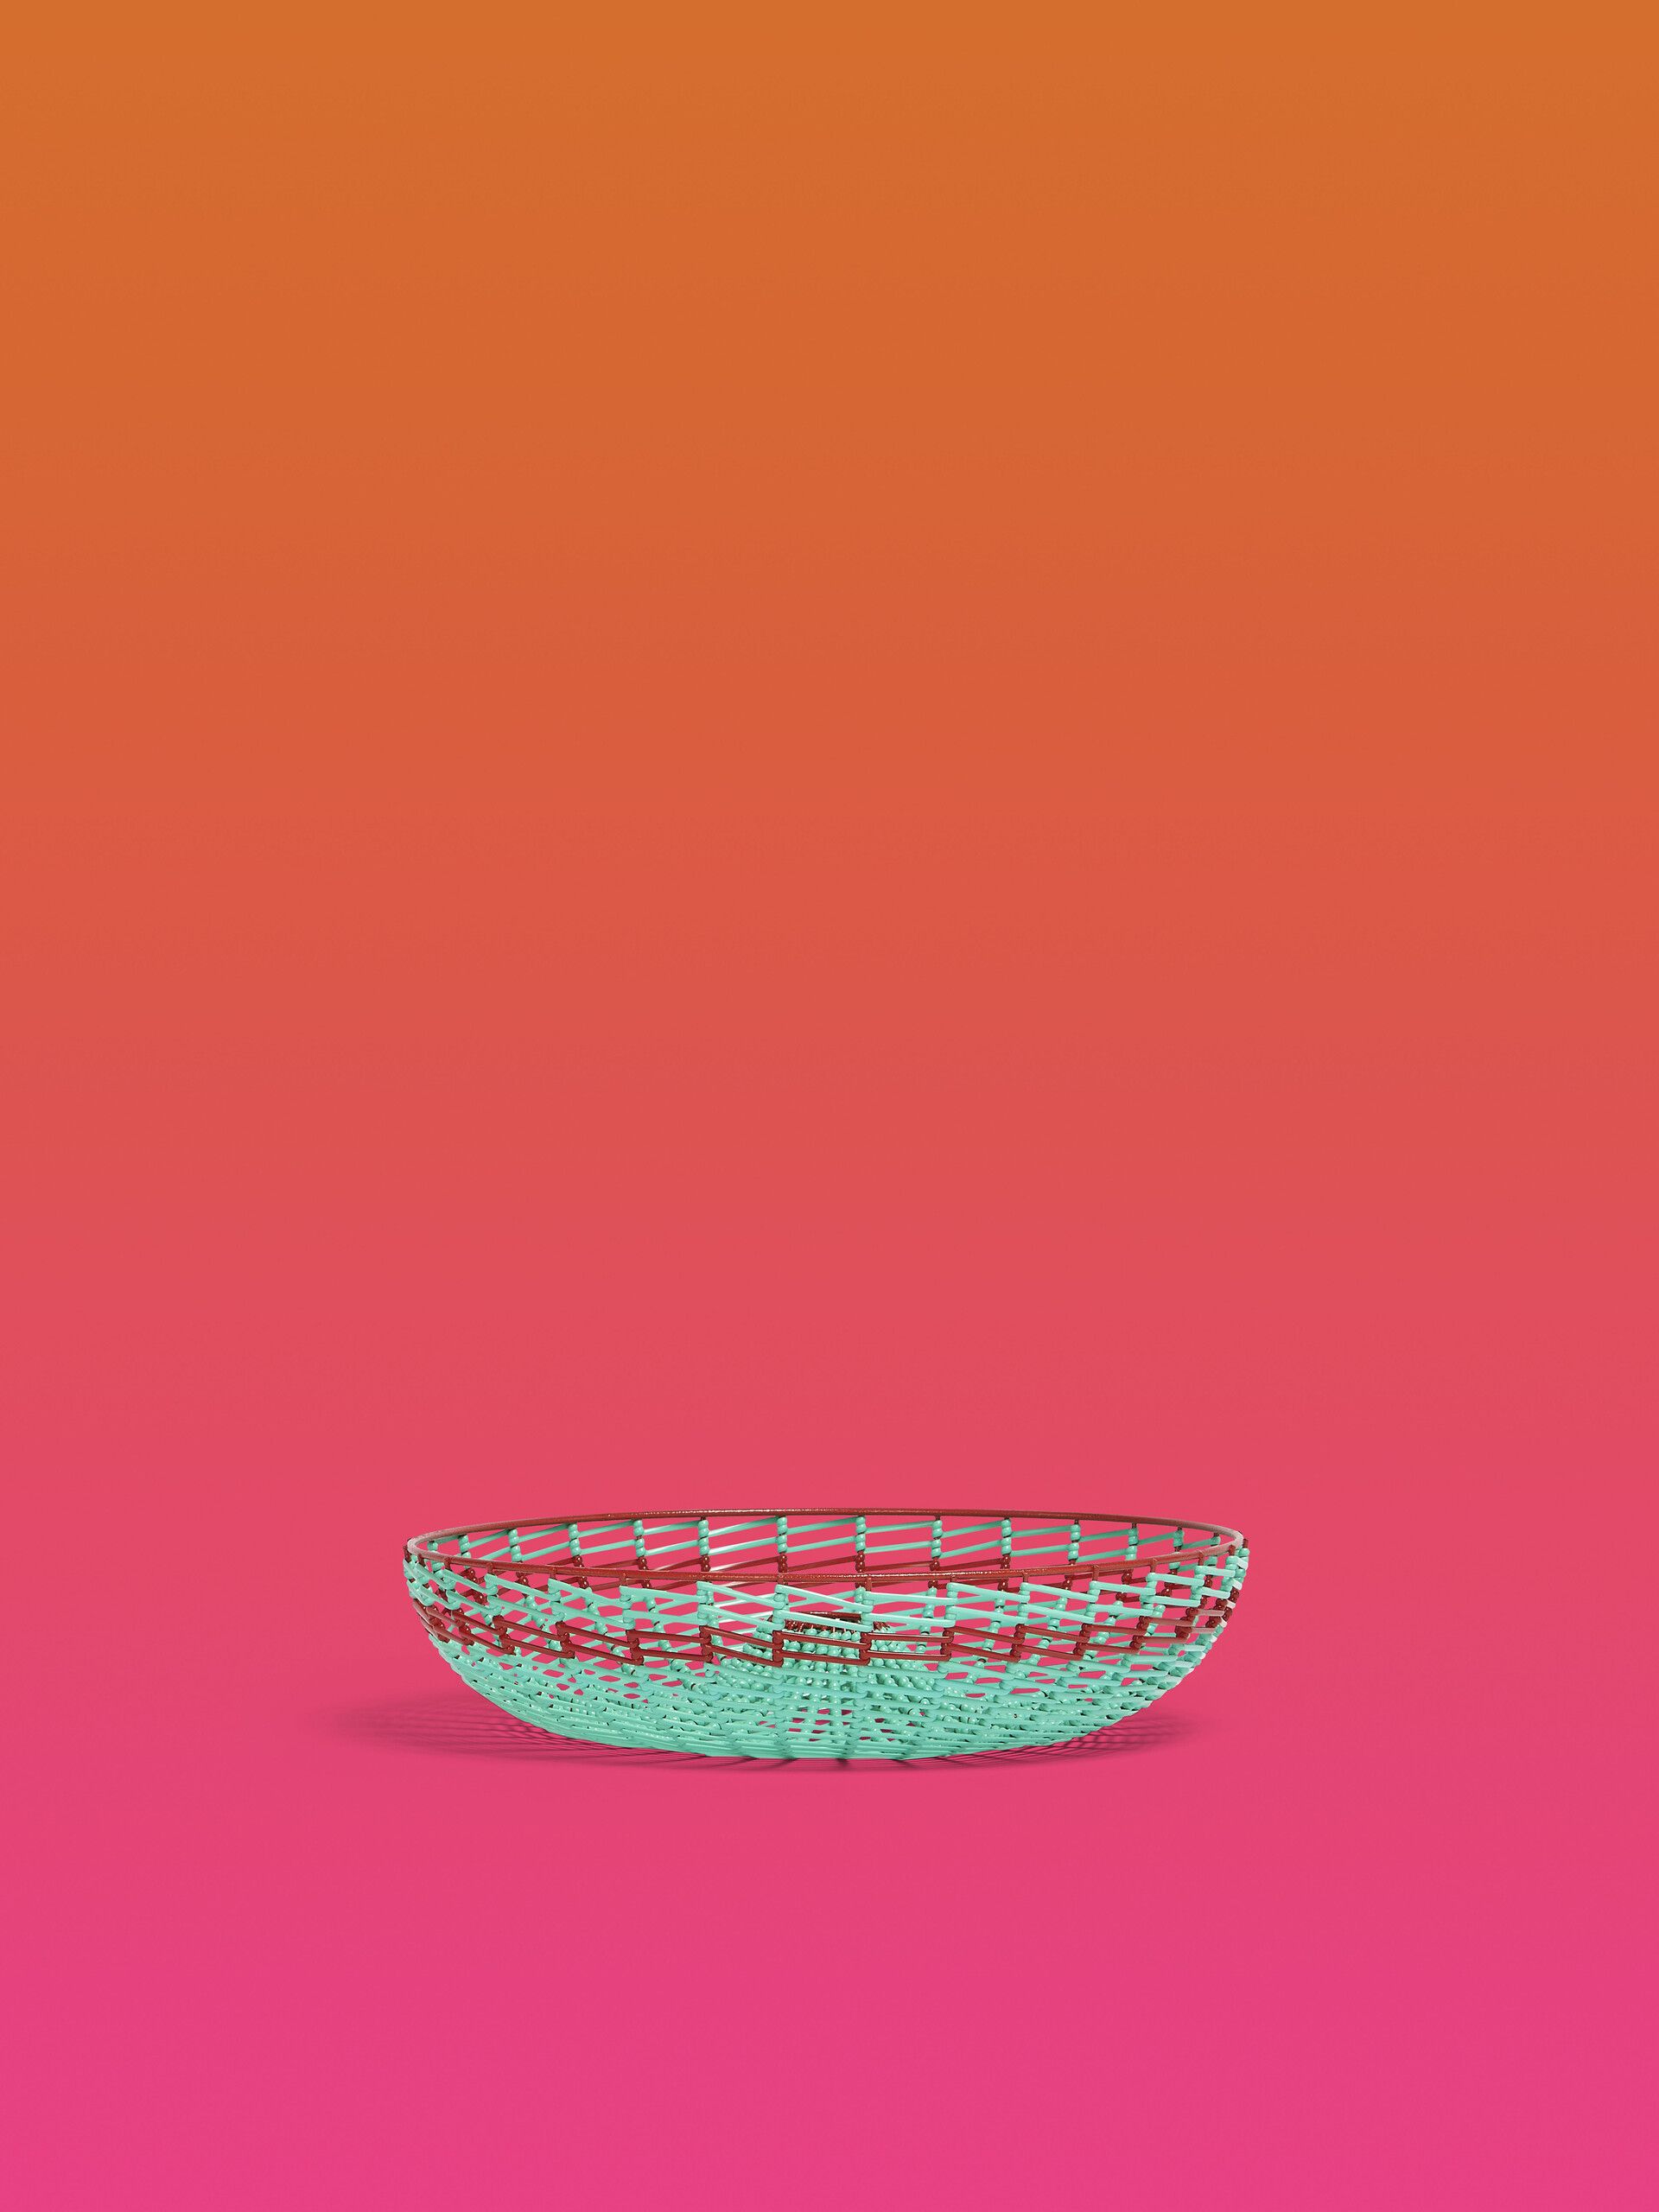 A bowl sitting on top of an orange surface - Turquoise